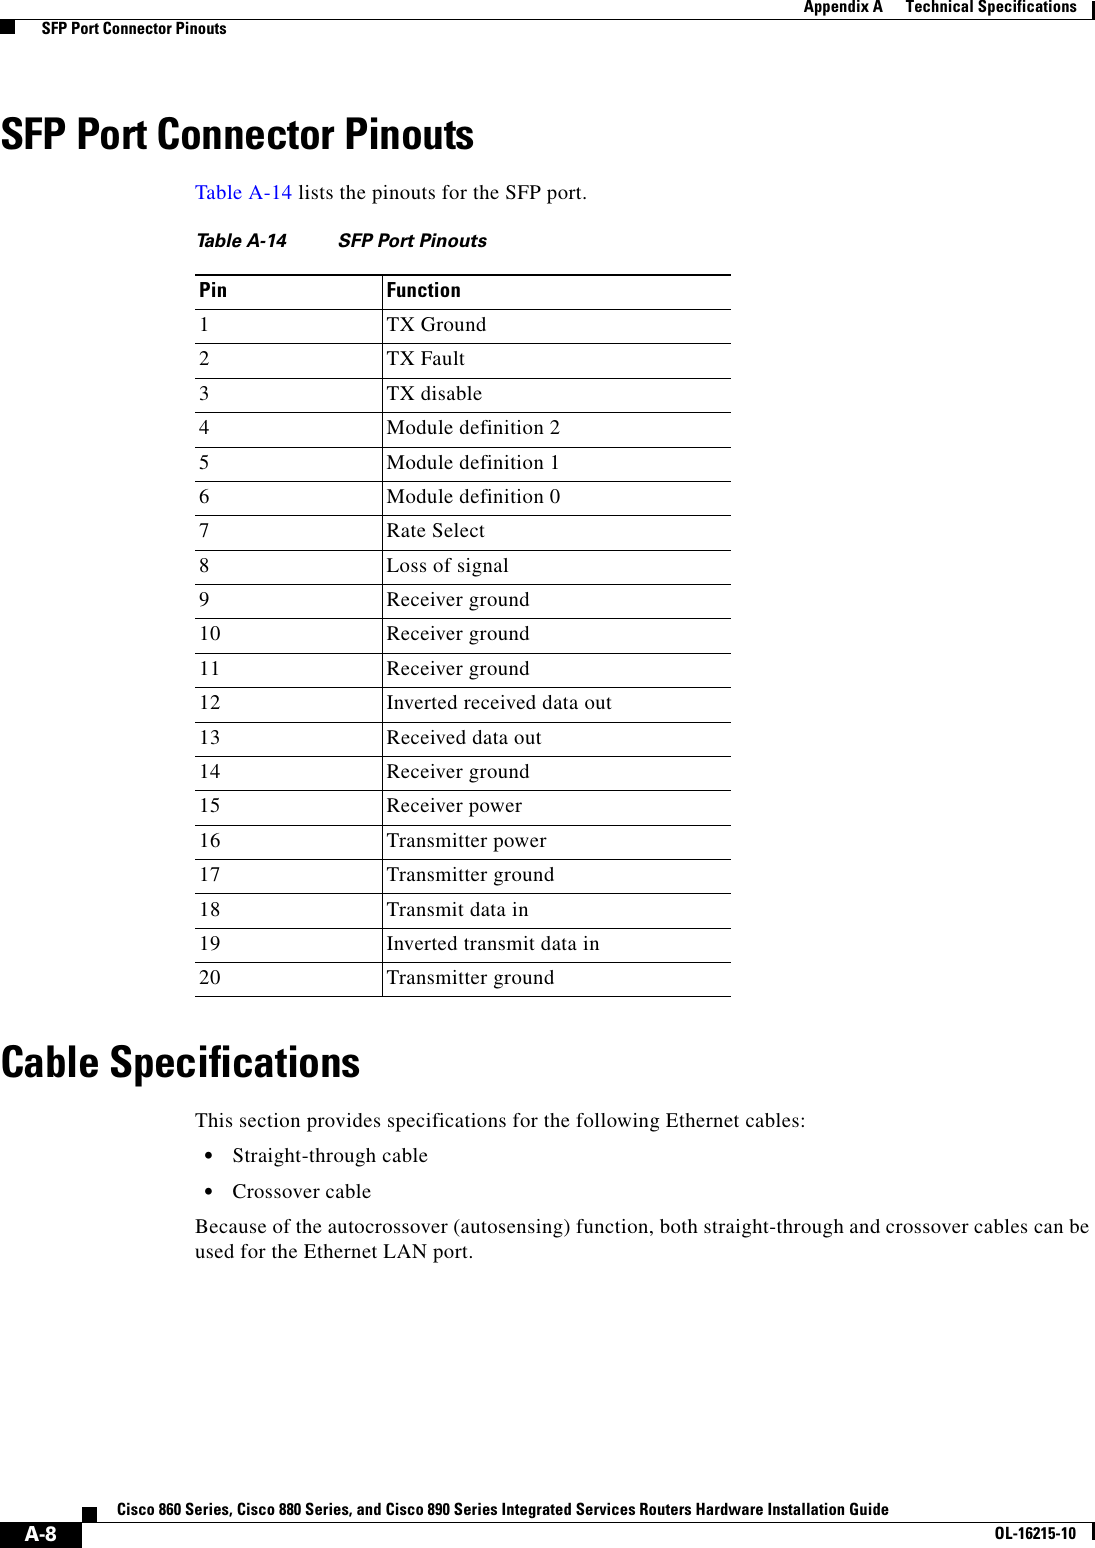  A-4Cisco 860 Series, Cisco 880 Series, and Cisco 890 Series Integrated Services Routers Hardware Installation GuideOL-16215-10Appendix A      Technical Specifications  Console and Auxiliary Port Connector PinoutsTable A-4 describes the RJ-45 connector pinouts for the Gigabit Ethernet (GE) ports of the Cisco 860VAE and 860VAE-K9 ISRs.Console and Auxiliary Port Connector PinoutsTable A-5 lists the pinouts for the console and auxiliary port connectors.1. RX = Receive2. TX = TransmitTa b l e  A-4 Ethernet GE Port Pinouts PinGE Signal(LAN and WAN)1Tx A+11. TX = Transmit2Tx A-3Rx B+22. RX = Receive4Tx C+5Tx C-6Rx B-7Rx D+8Rx D-Ta b l e  A-5 Console and Auxiliary Port Connector Pinouts RJ-45 Pin Function1RTS2DTR3TXD4GND5GND6RXD7DSR8CTS